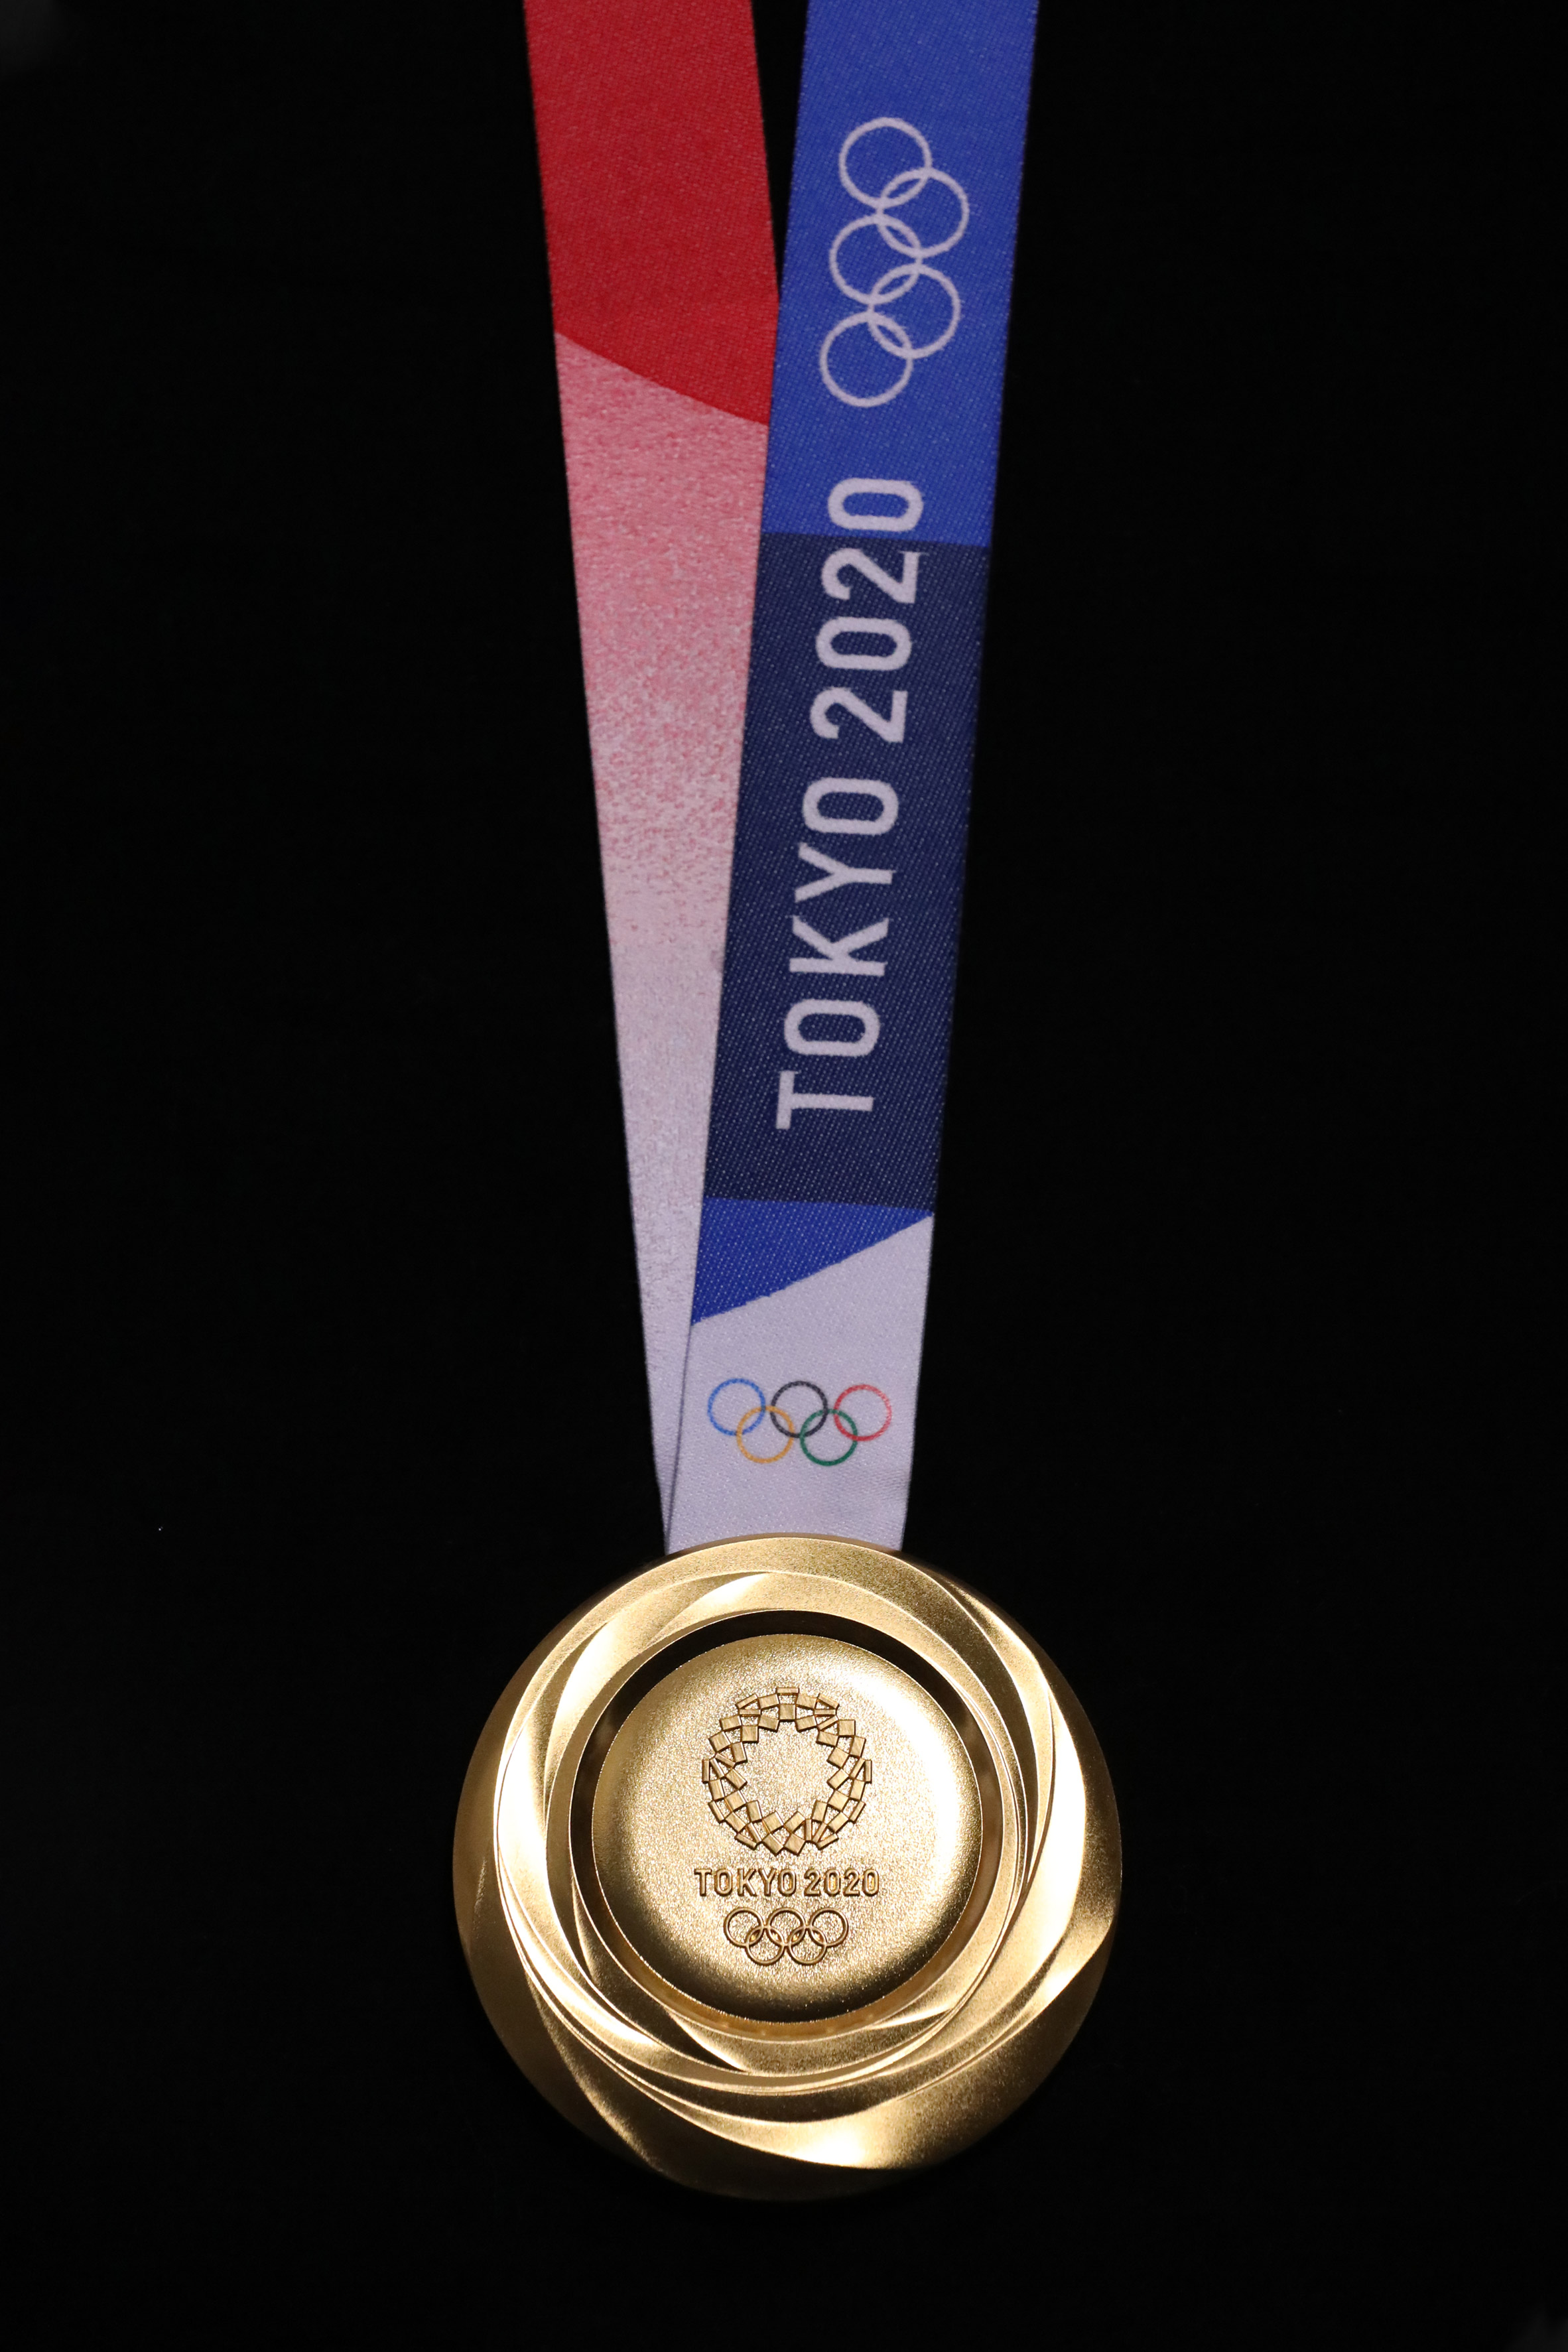 Tokyo unveils 2020 Olympic medals made from recycled smartphones